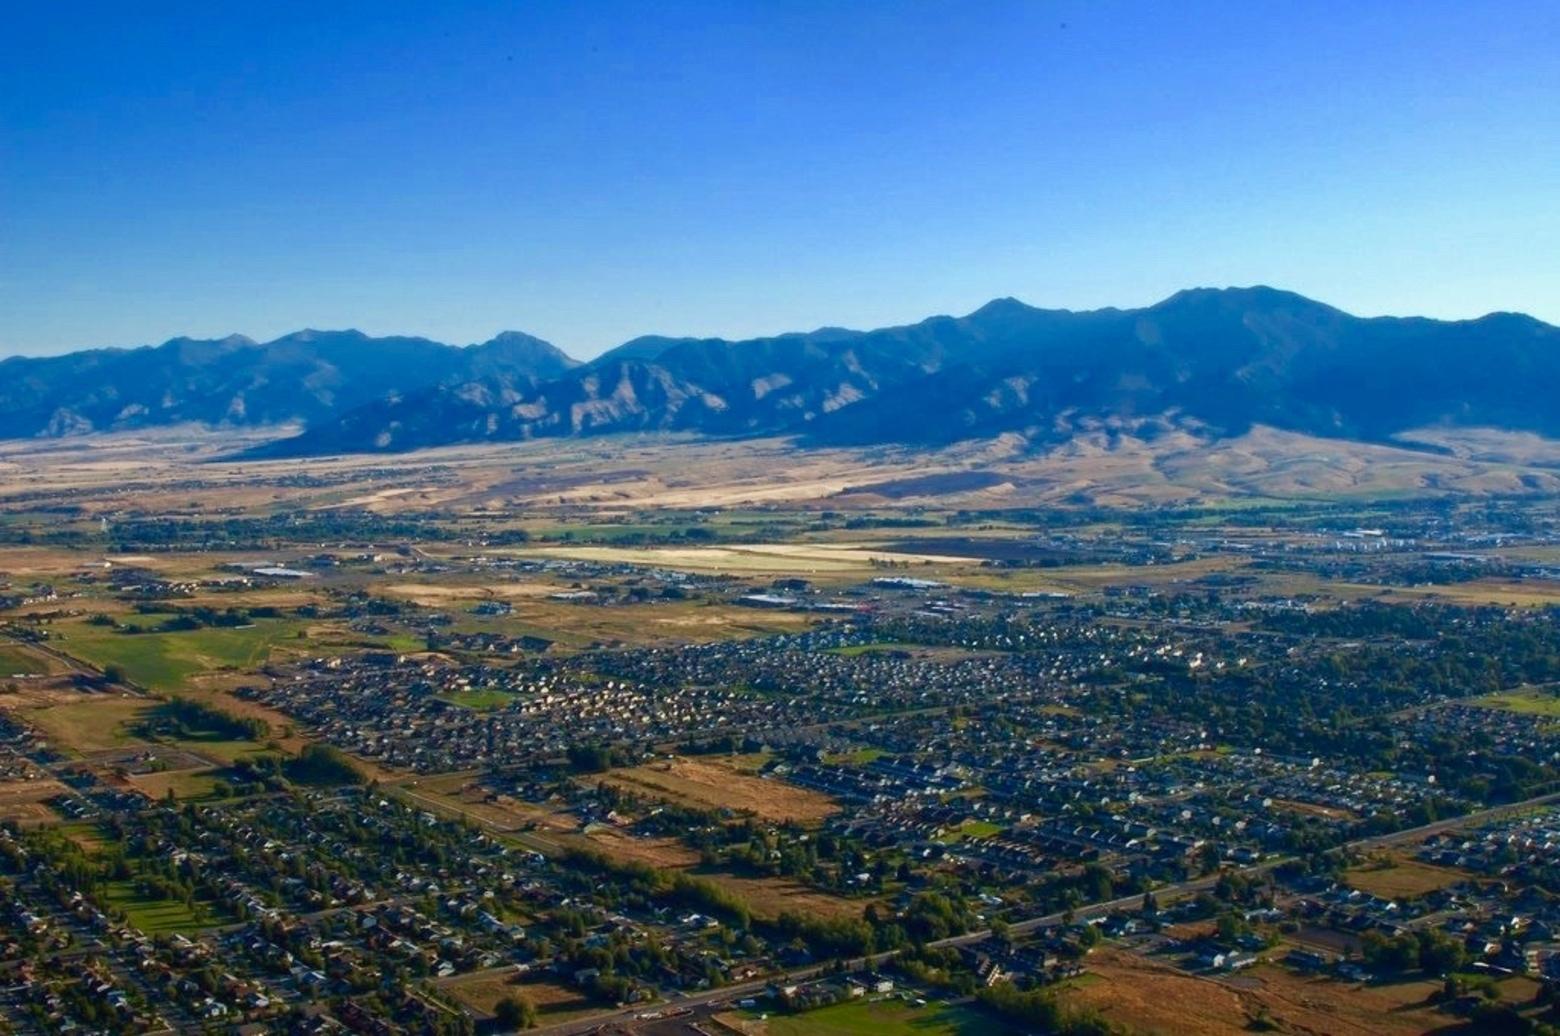 Bozeman and the Gallatin Valley emanates a strong sense of place. Every citizen plays a role in keeping it special.